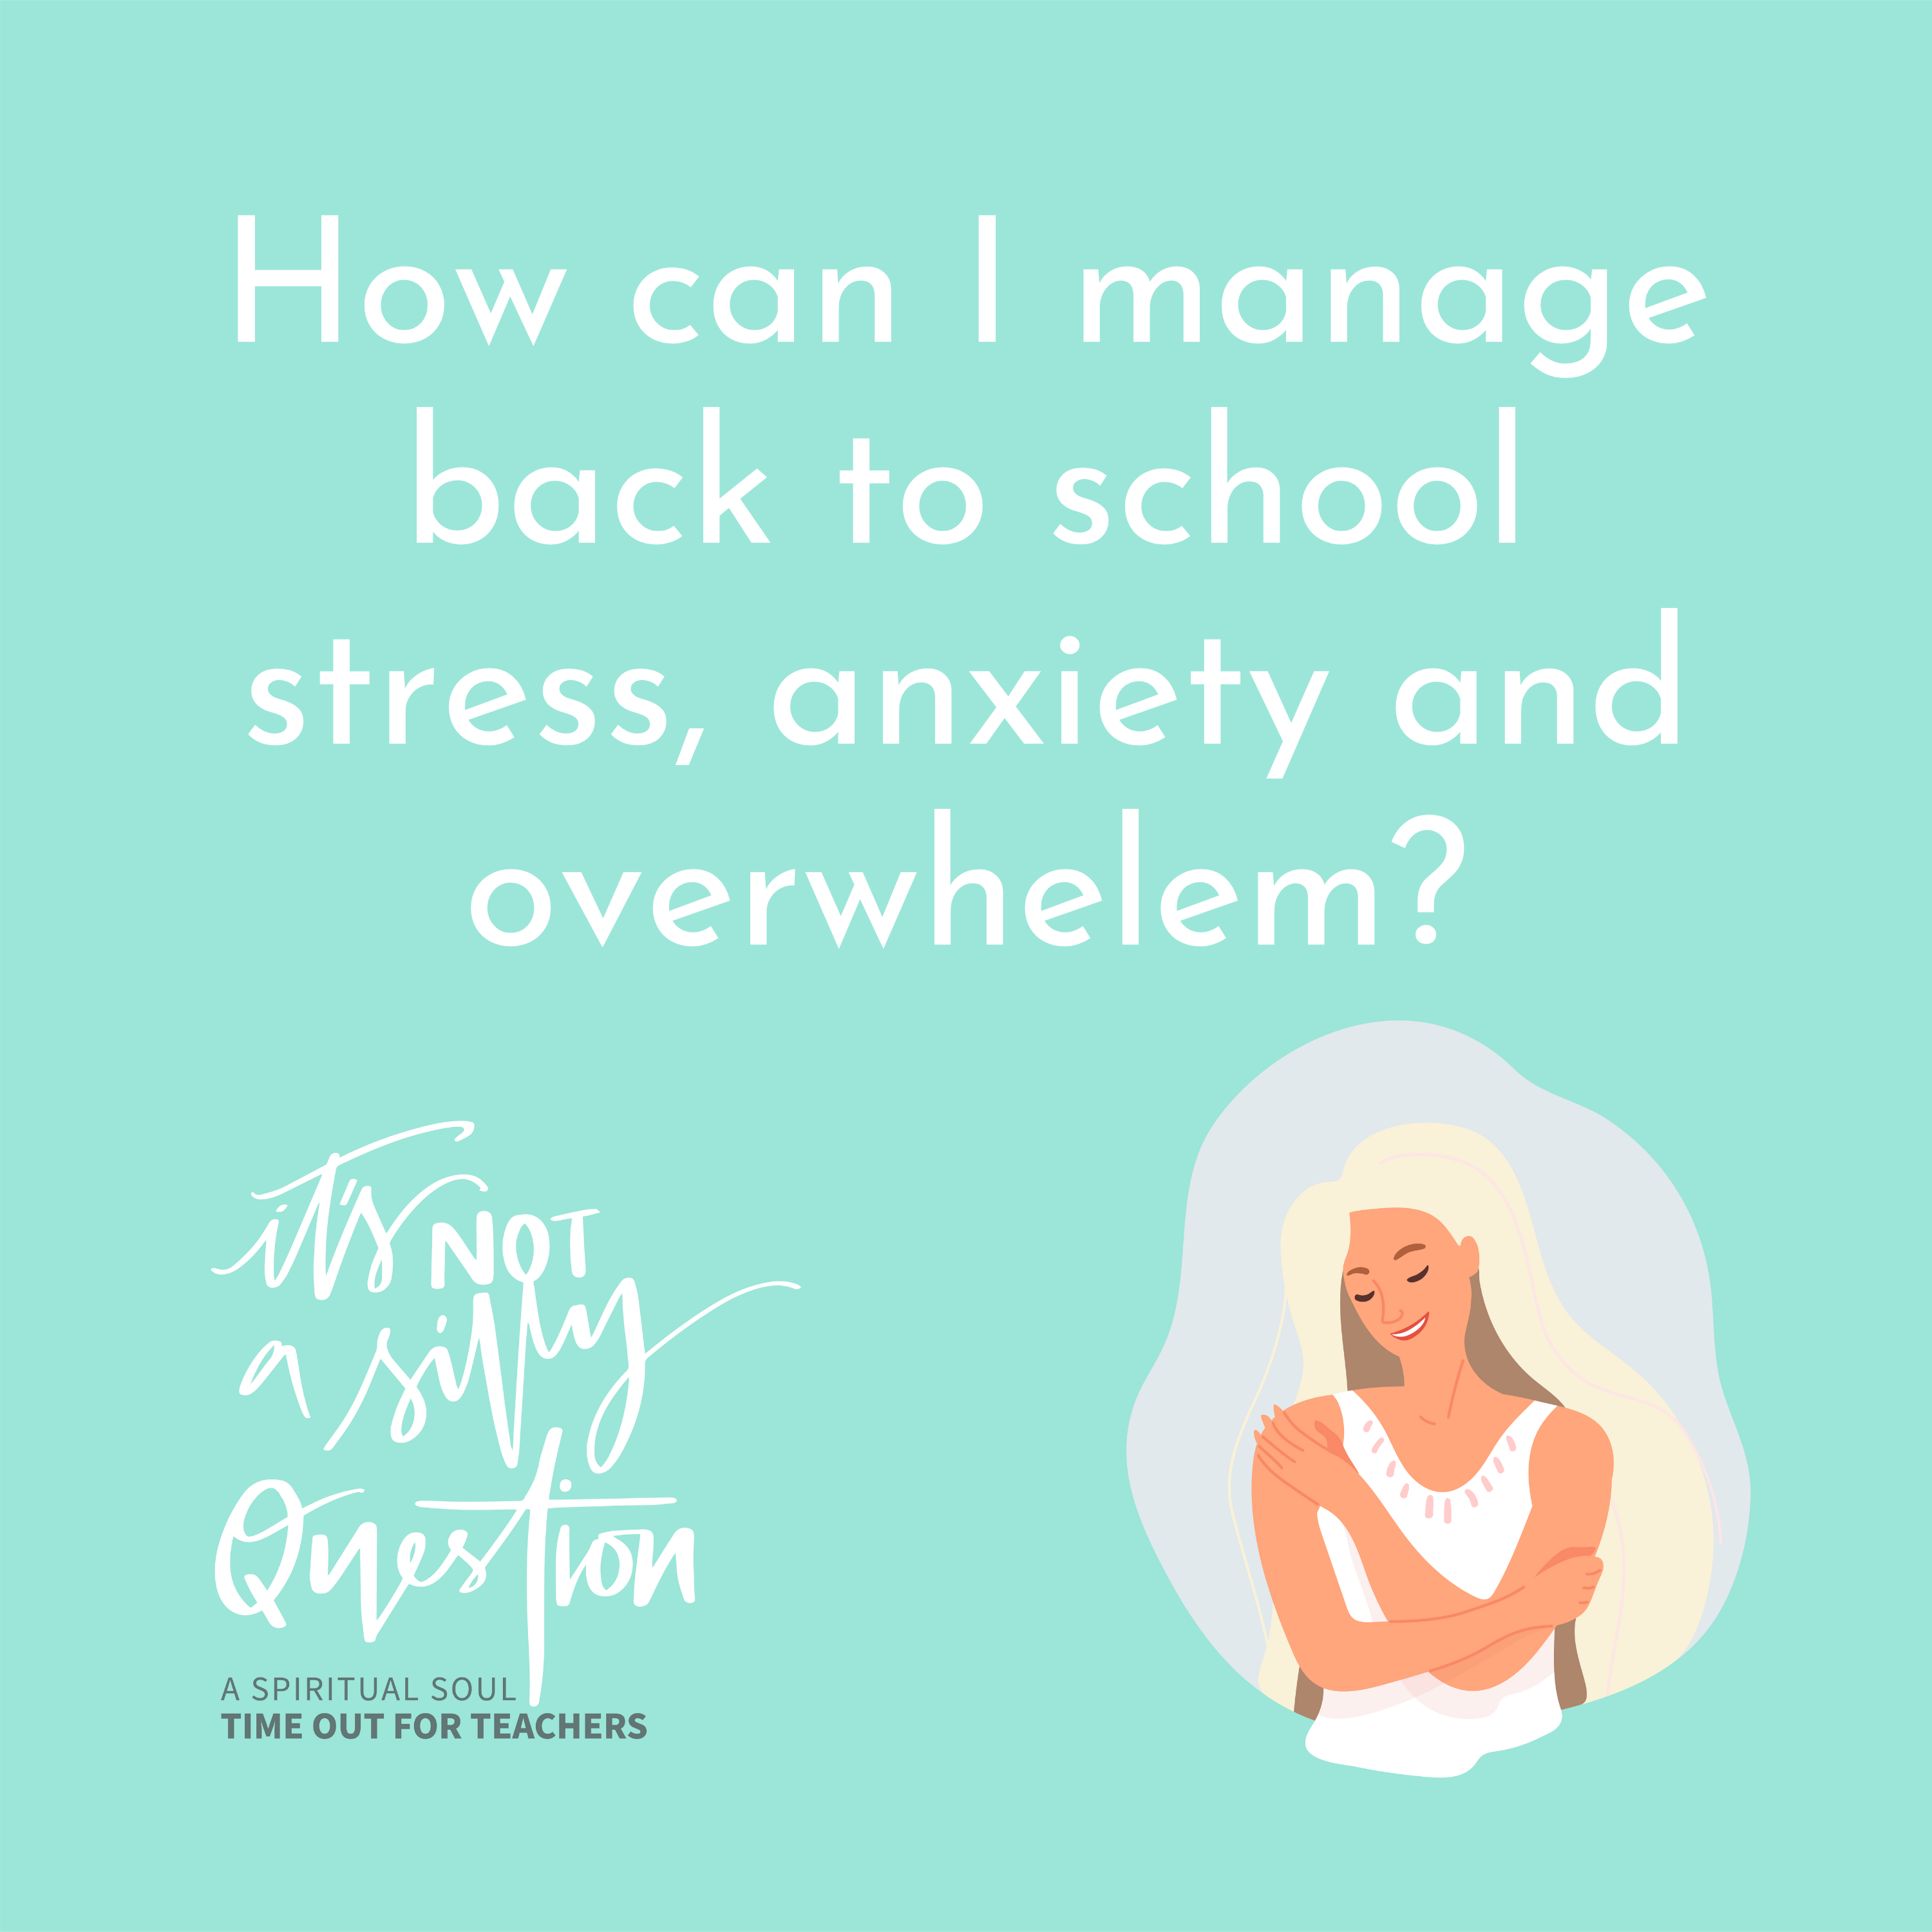 How can I manage back to school stress, anxiety and overwhelm?